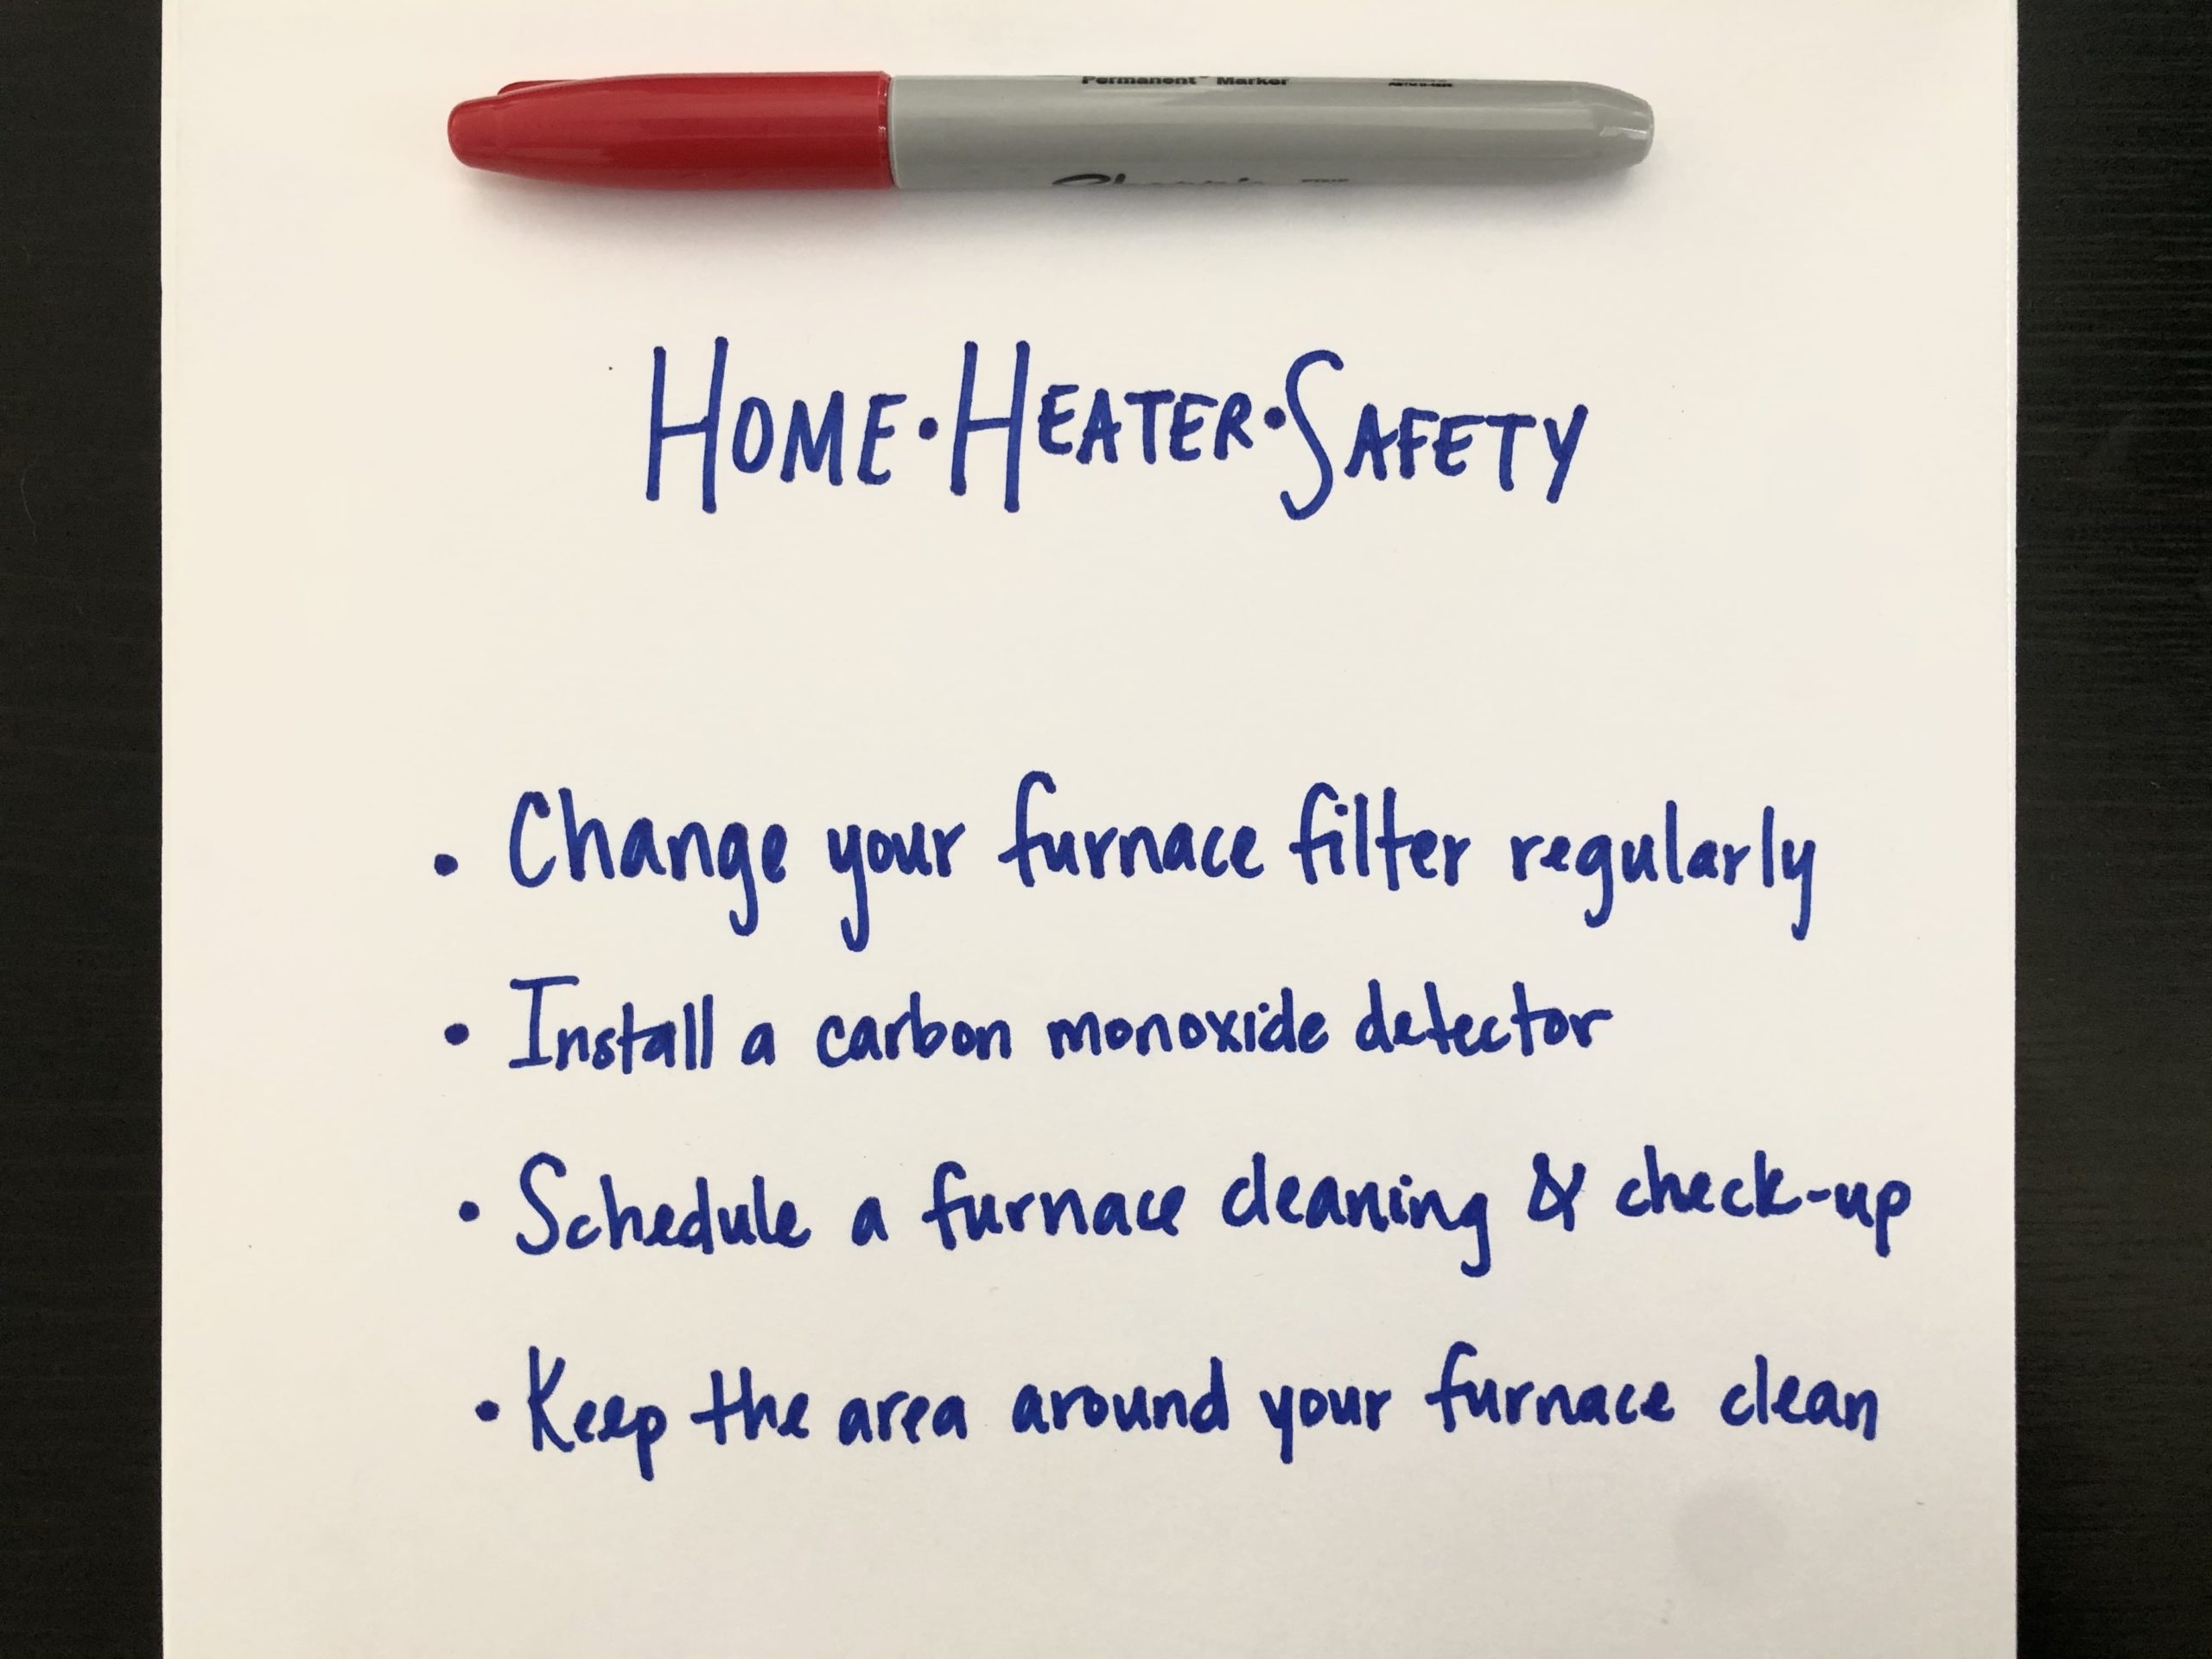 home heater safety, Home Heater Safety